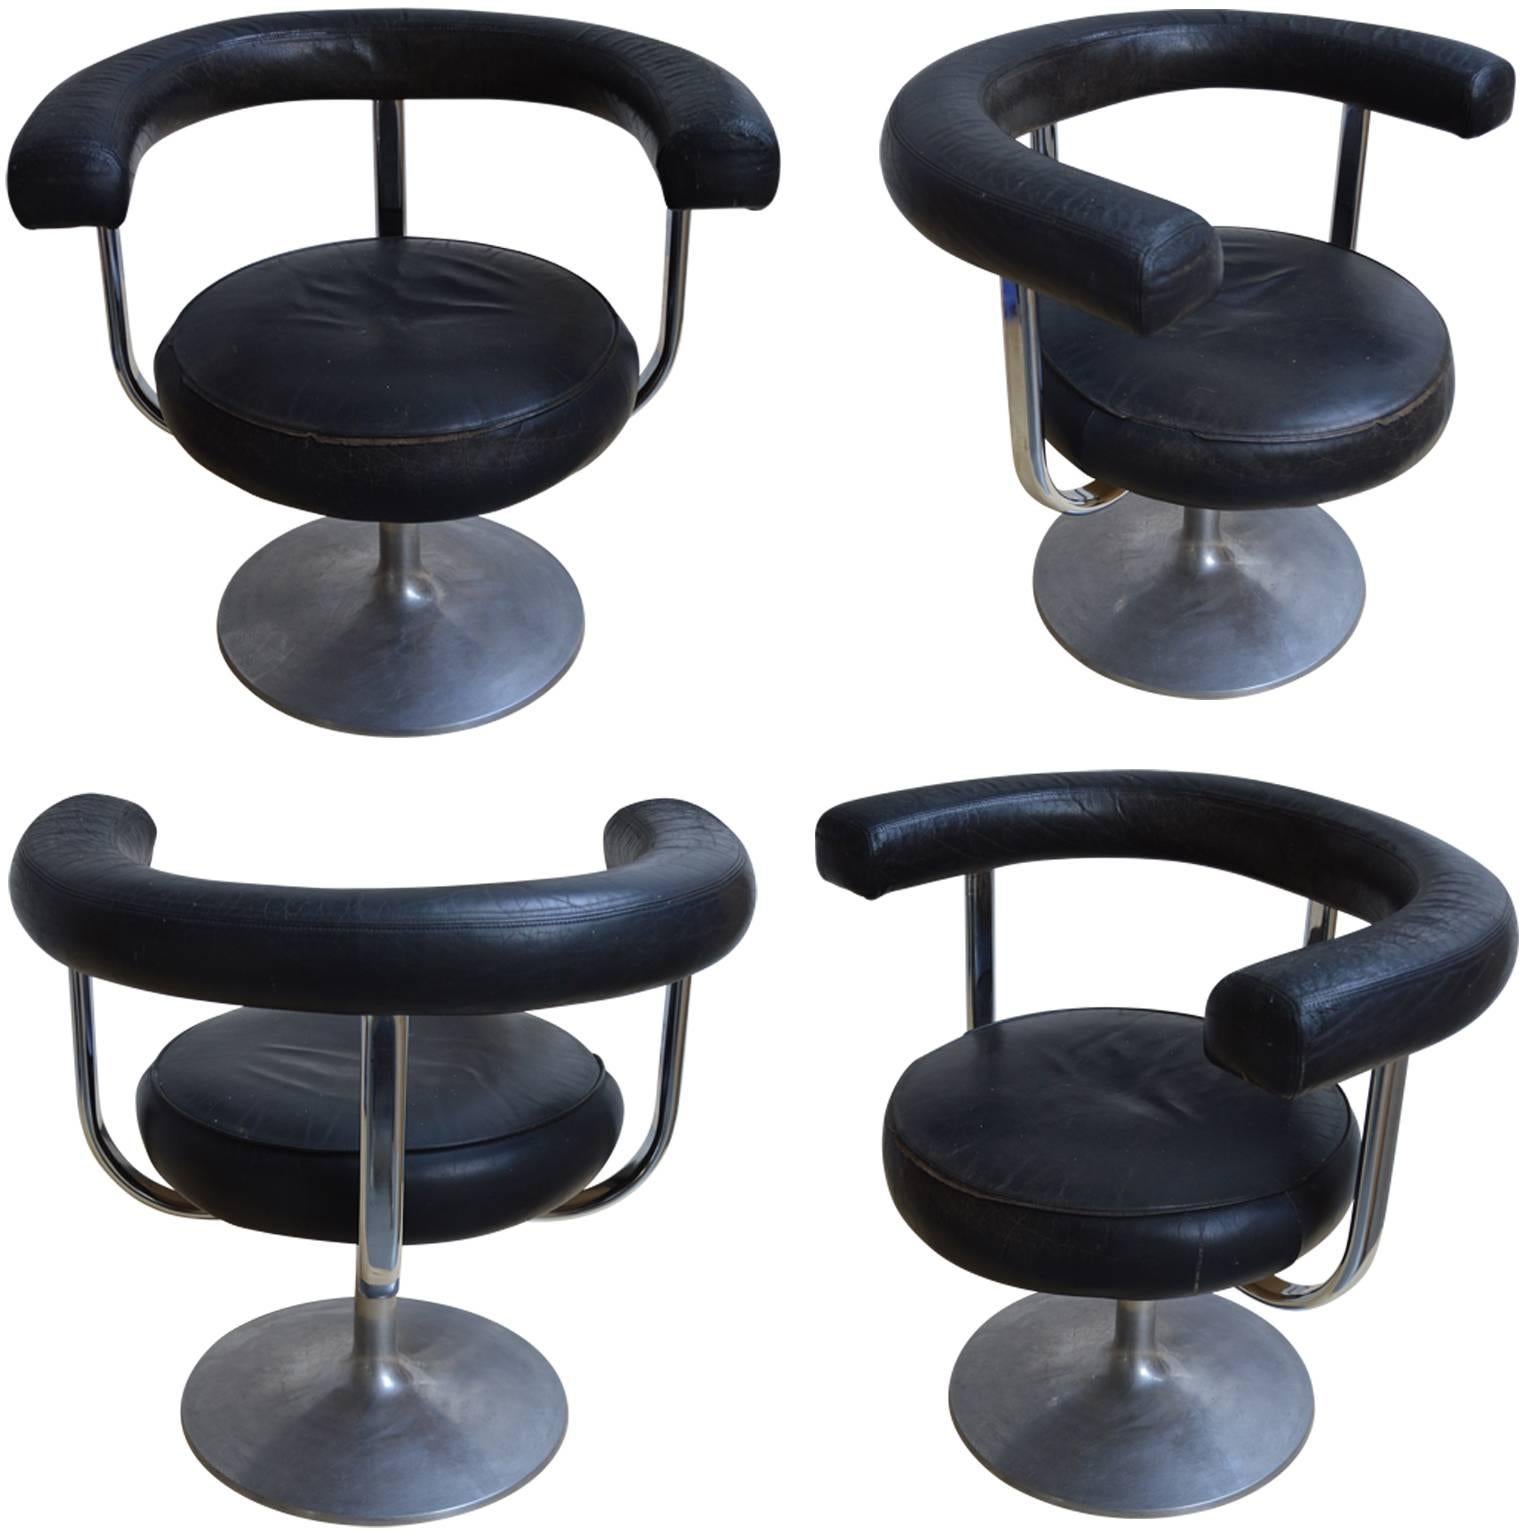 Four great looking swivel leather and chrome horse-shoe shaped armchairs.
The chairs will arrive in New Jersey in the beginning of december.